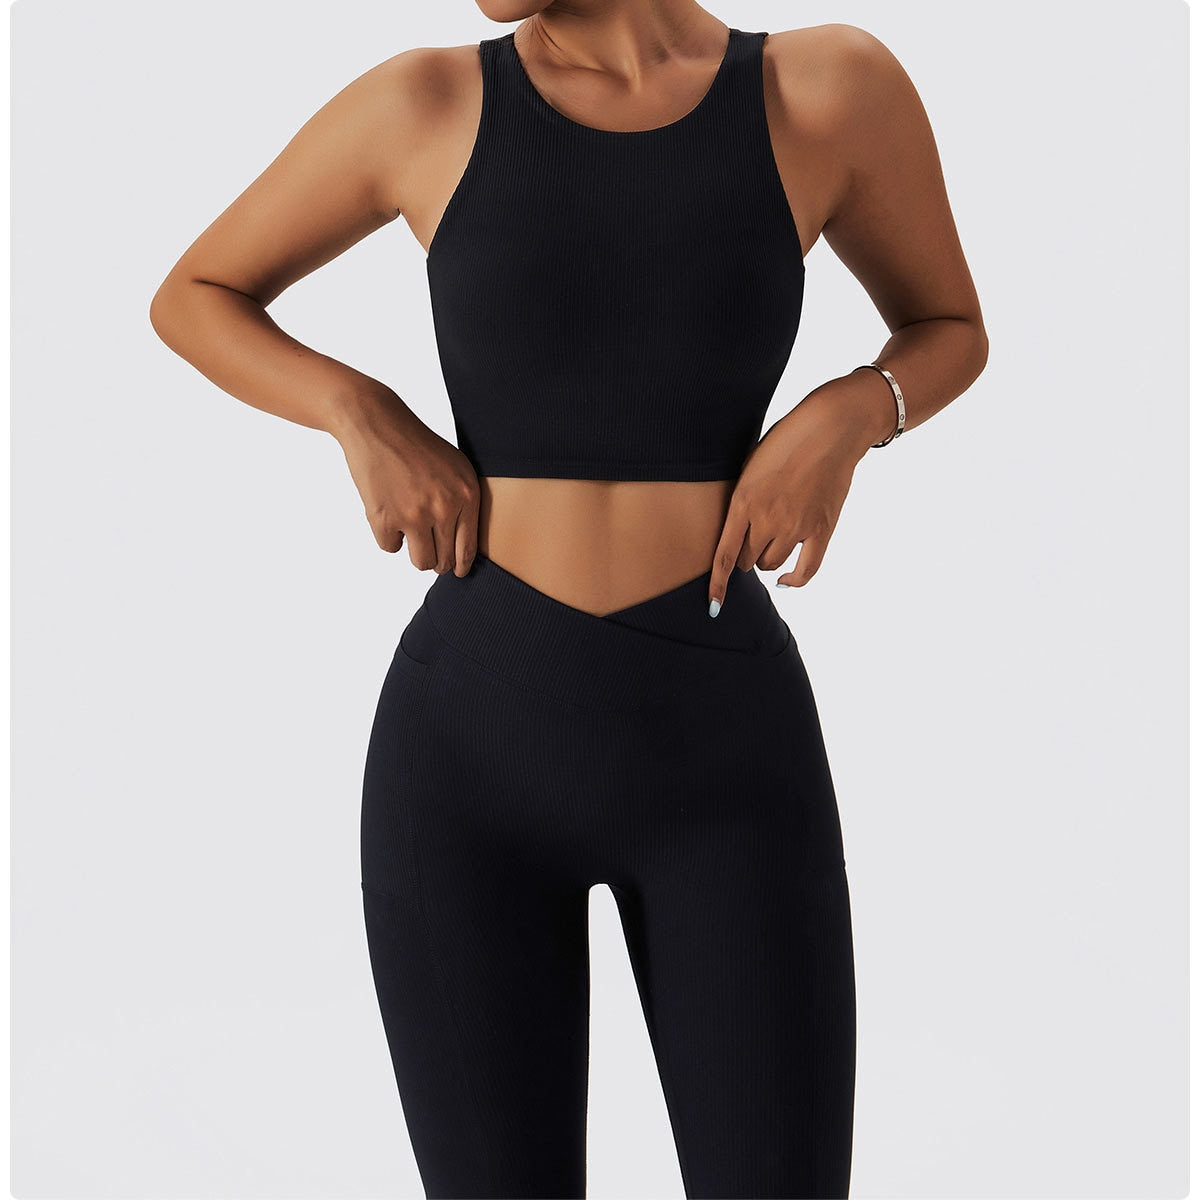 2 Piece Ribbed Yoga Set Women Suit For Fitness Sportswear Seamless Sports Suit Workout Clothes Tracksuit Sports Outfit Gym Clothing Wear The Clothing Company Sydney